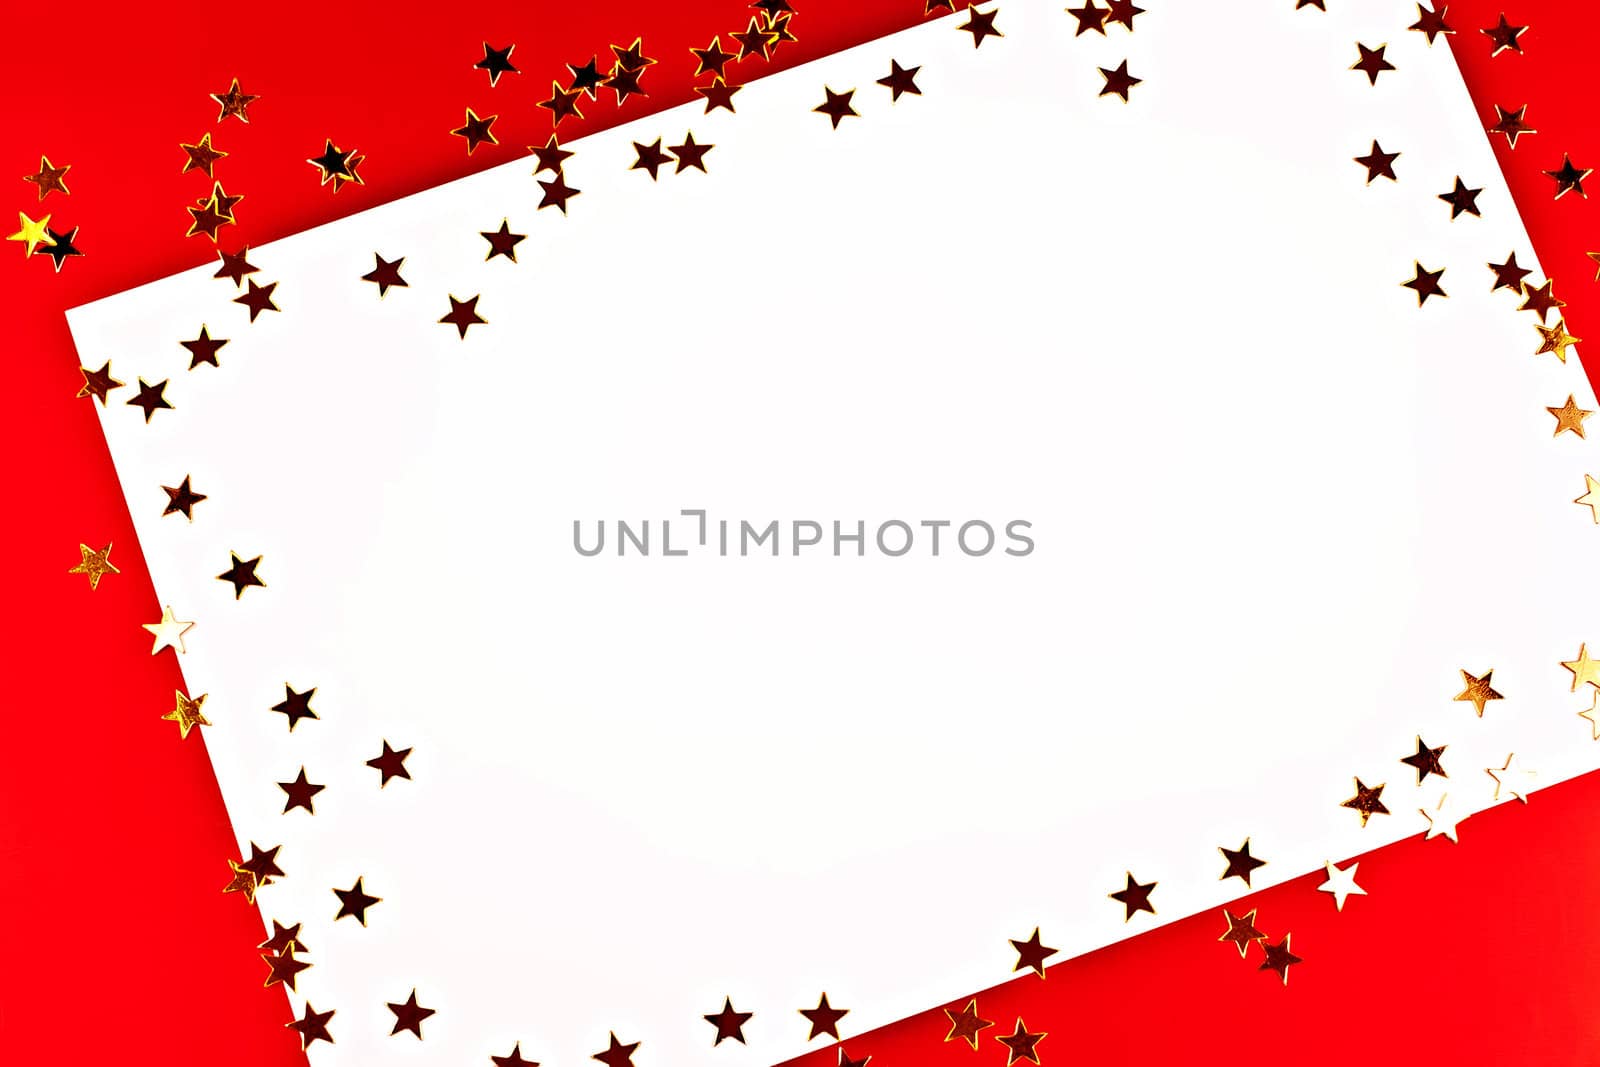 On a red background white greeting card with golden stars.
